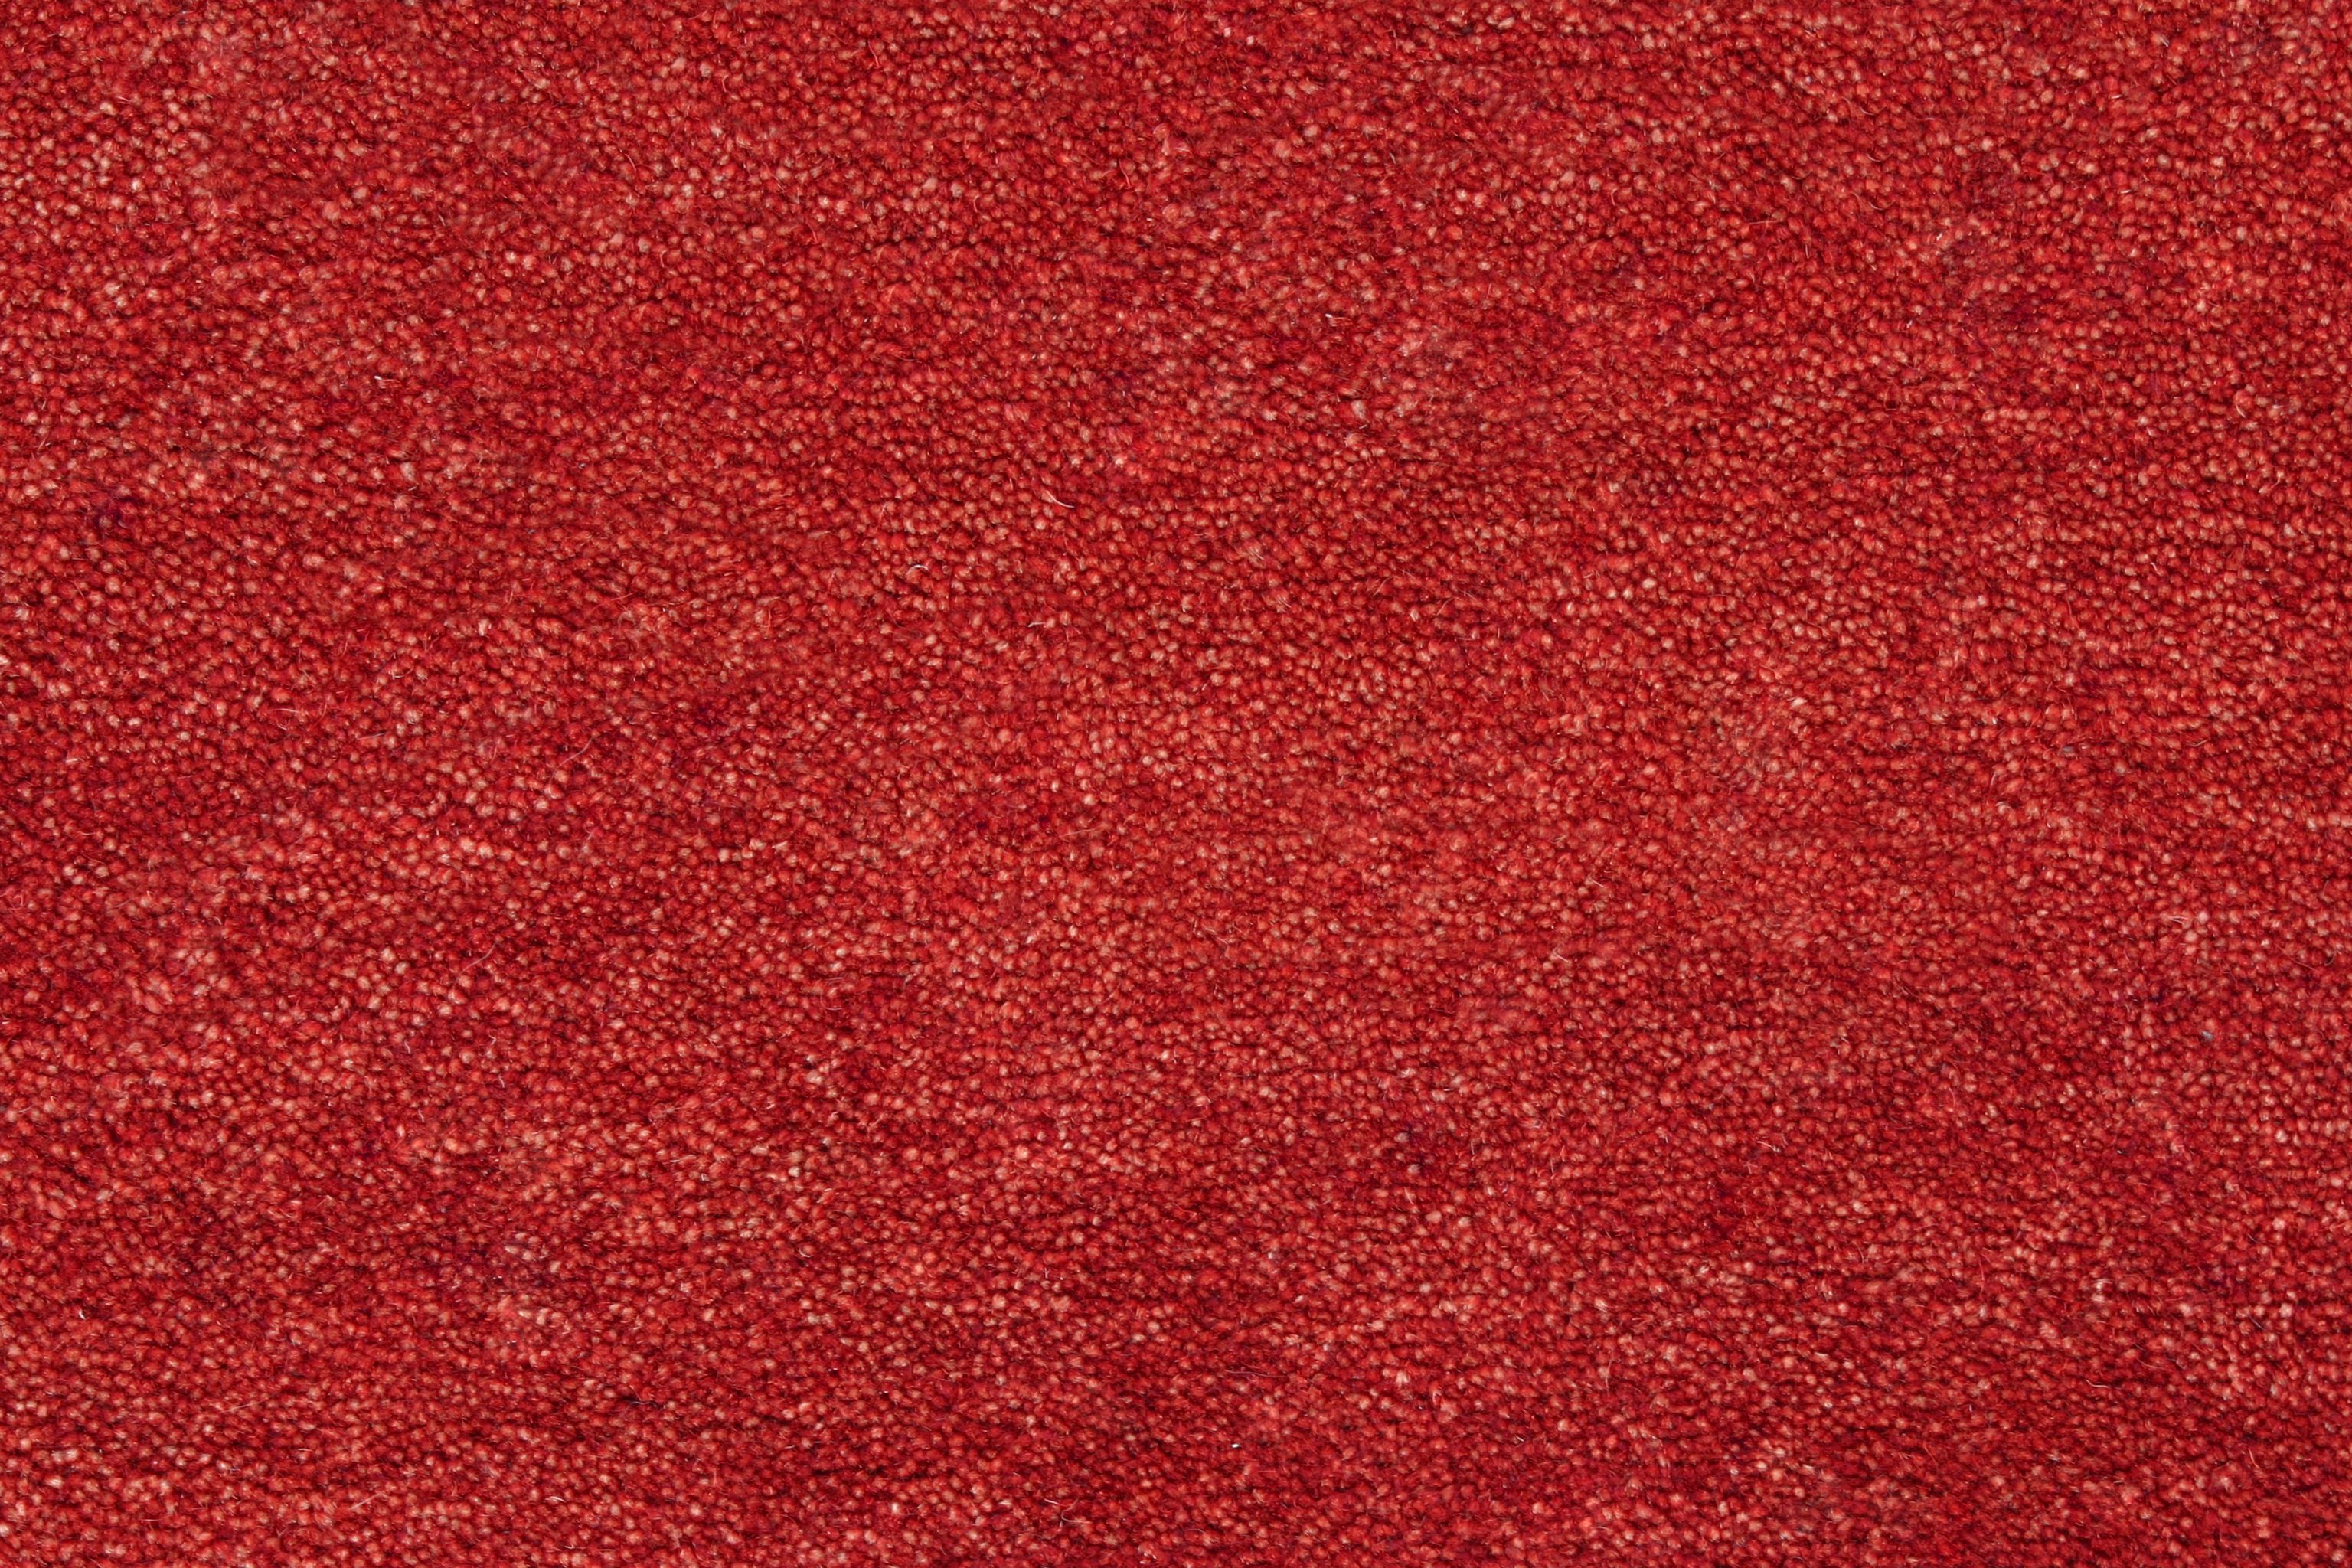 red carpeting rugs textures seamless - 21 textures